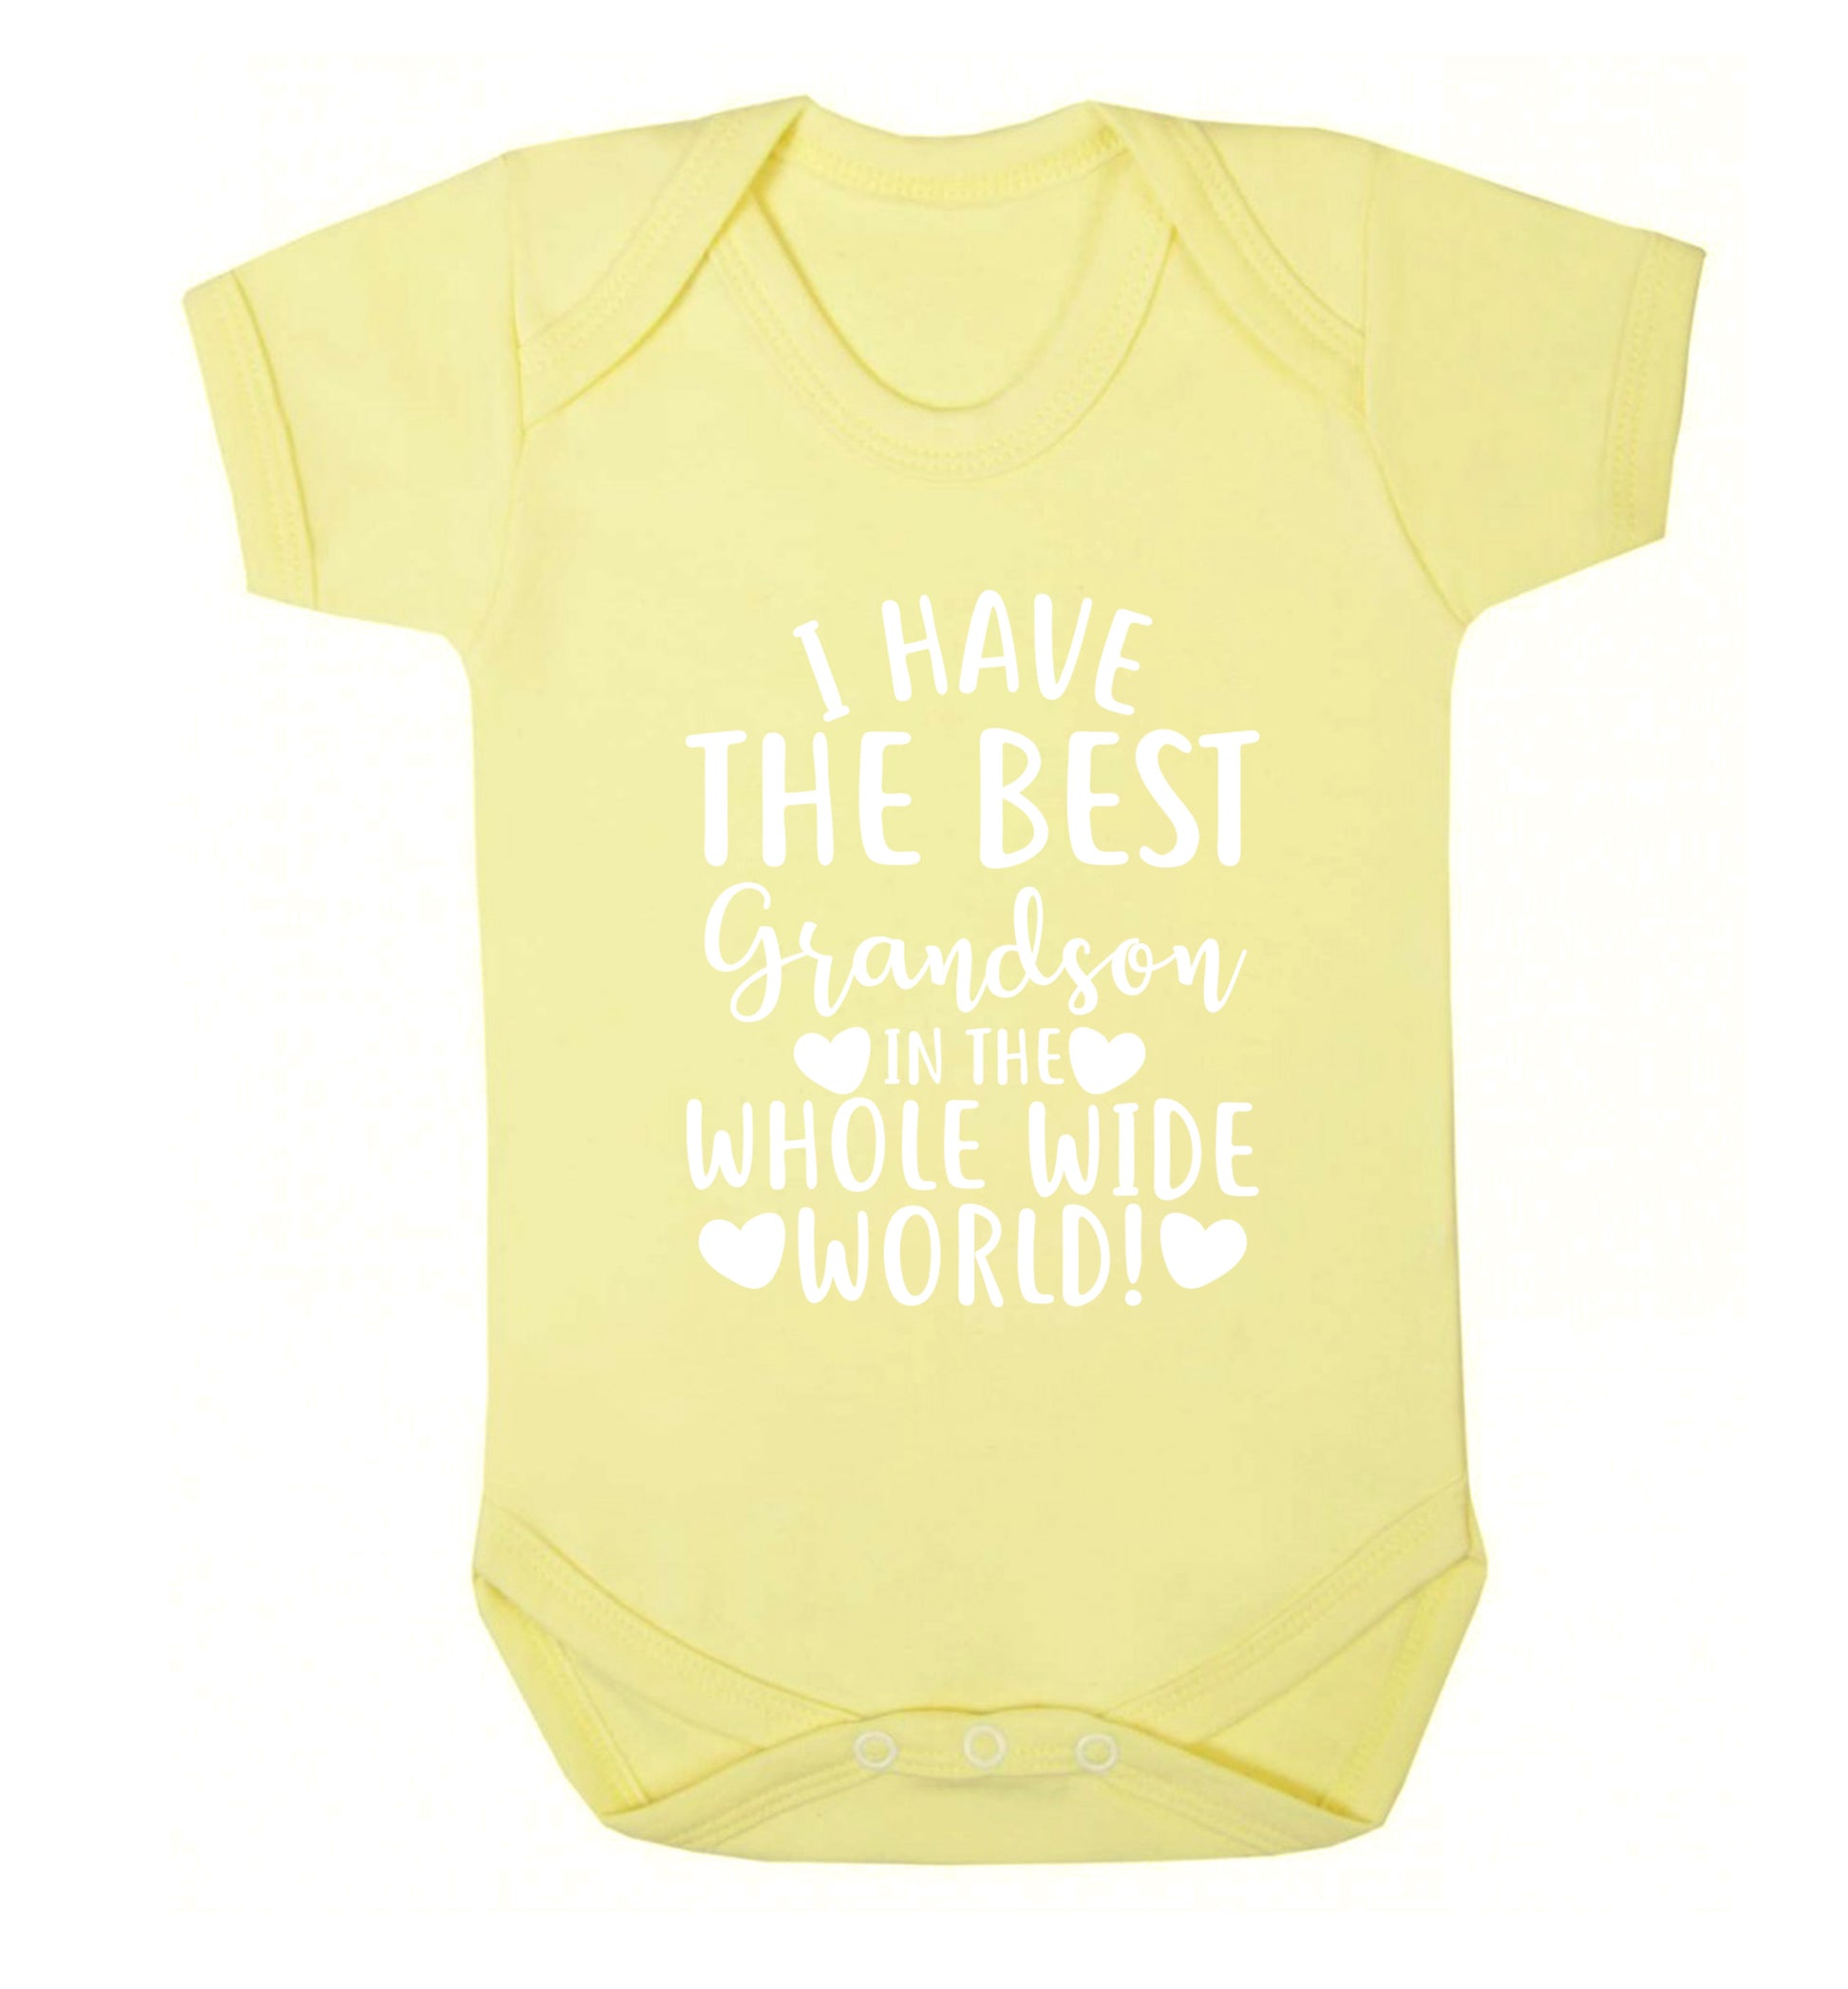 I have the best grandson in the whole wide world! Baby Vest pale yellow 18-24 months